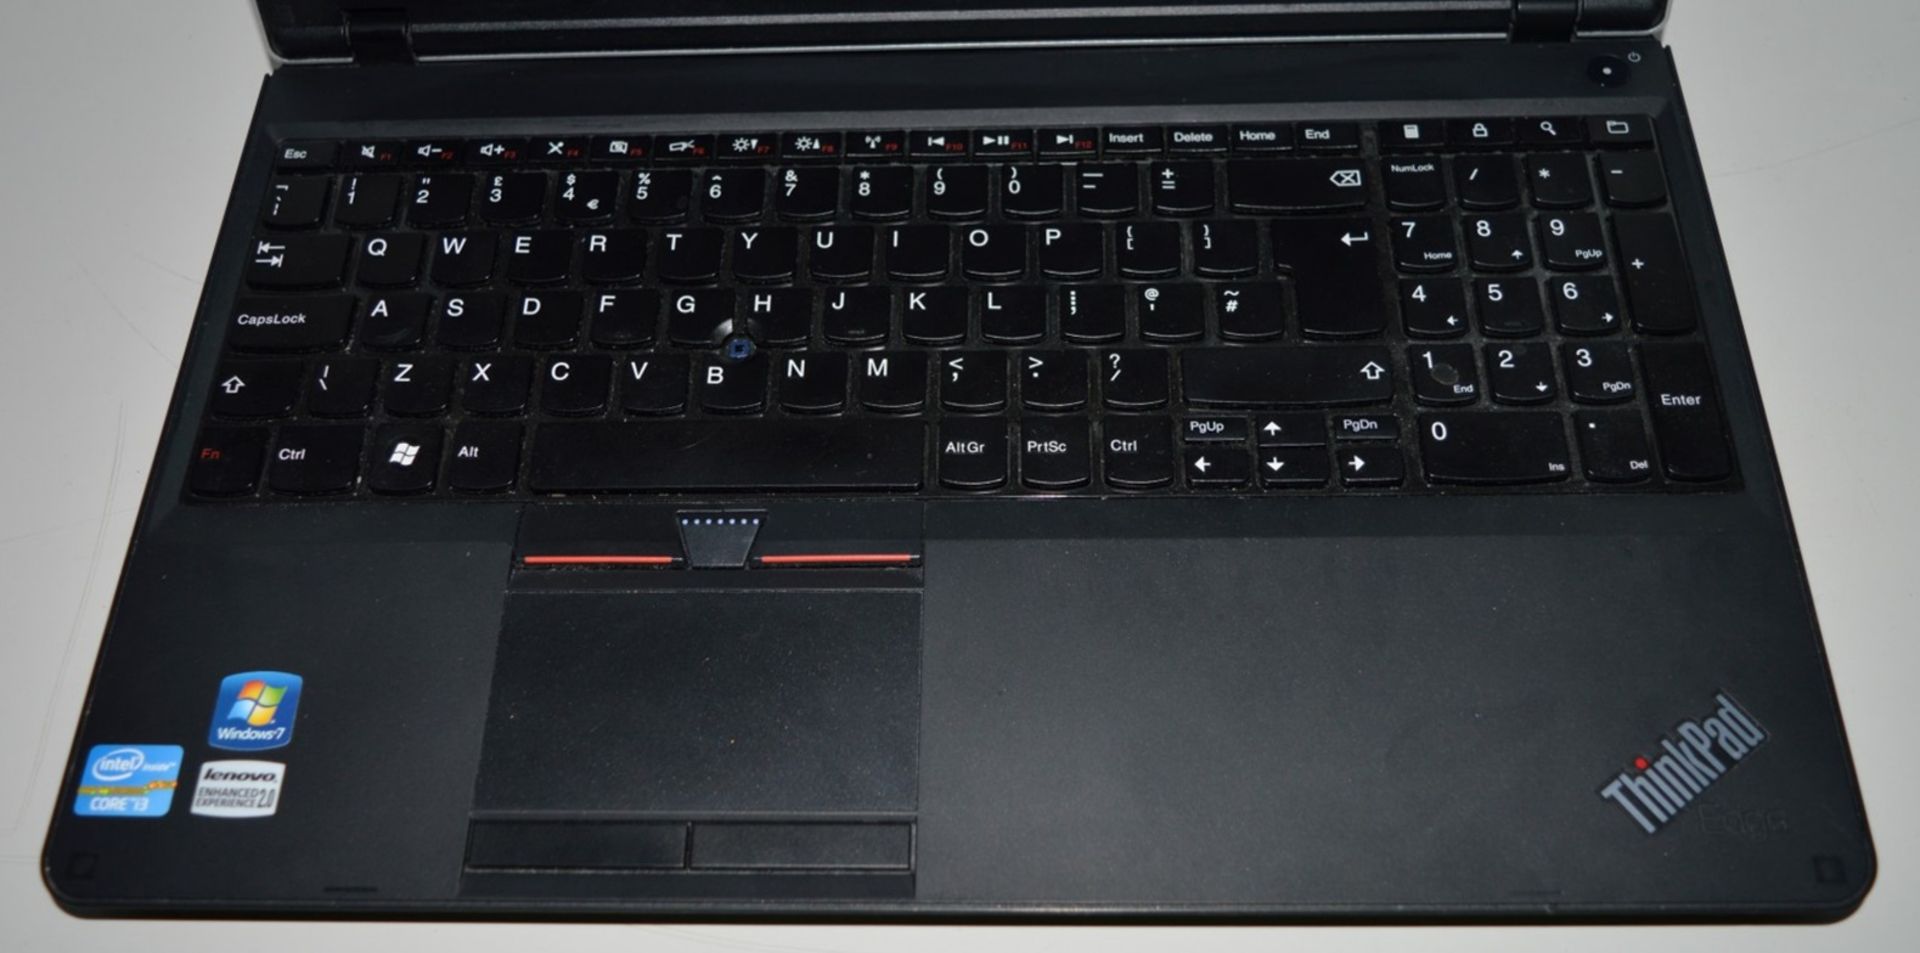 1 x Lenovo Thinkpad Laptop Computer With Intel Core i3 Processor and 15.4 Inch Screen - CL300 - - Image 3 of 7